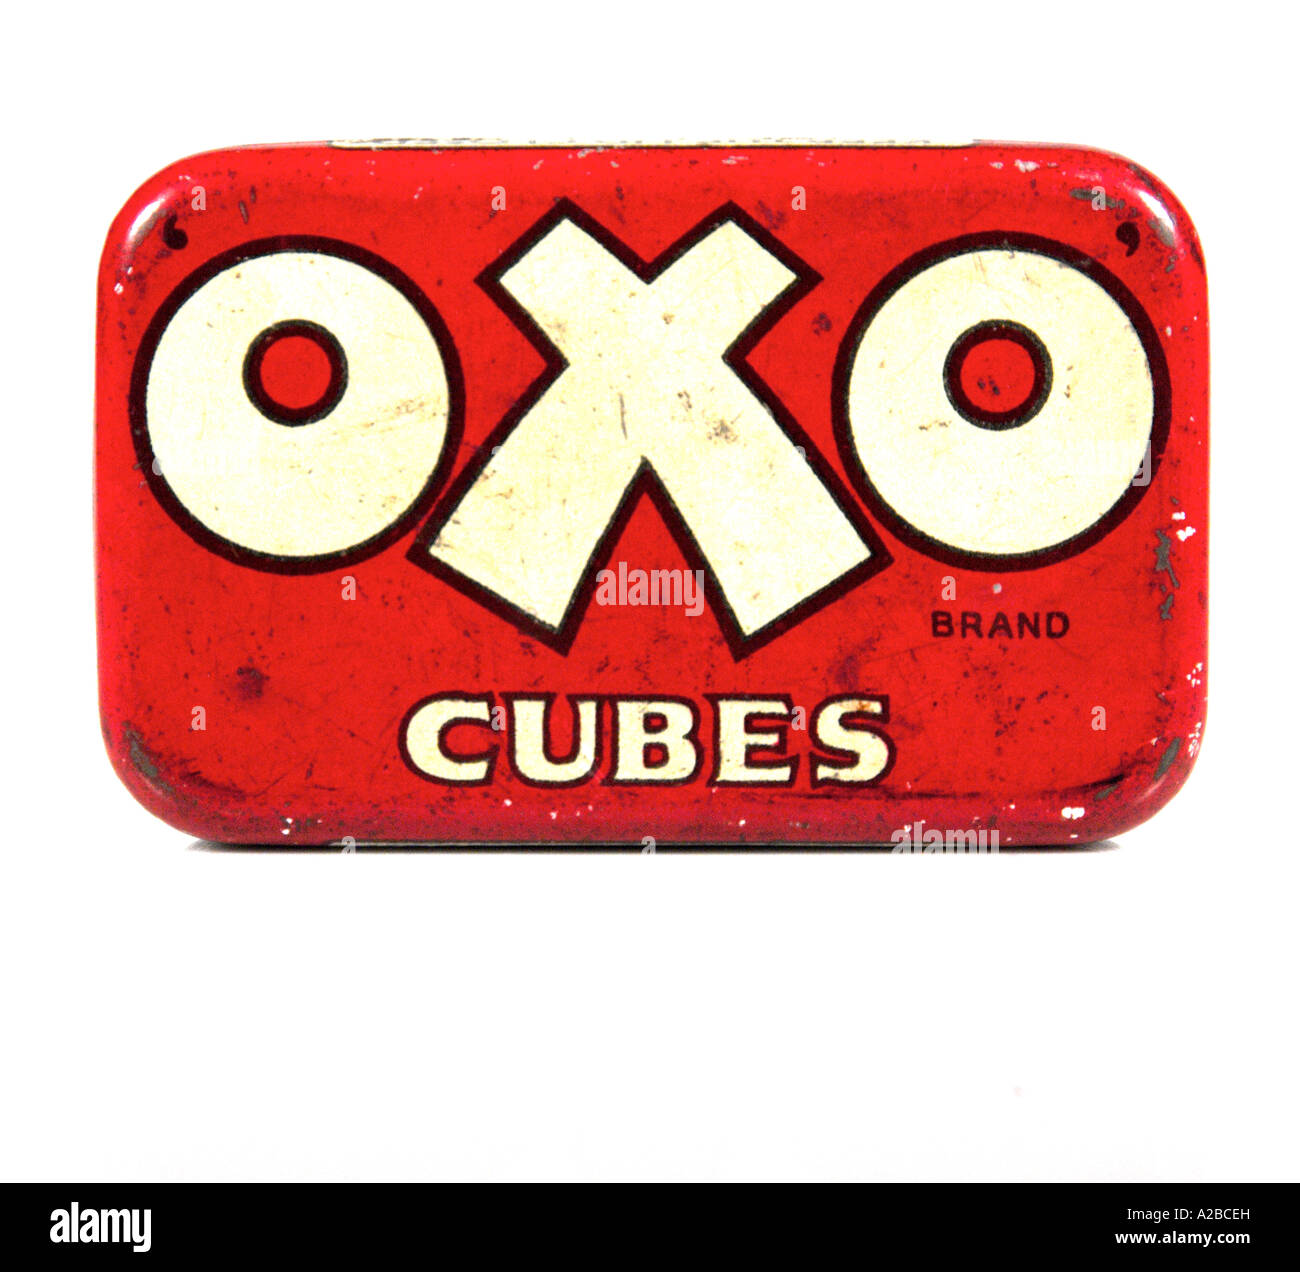 Vintage OXO Cubes Tin Isolated on White Background. Editorial Photo - Image  of dried, kingdom: 143441186